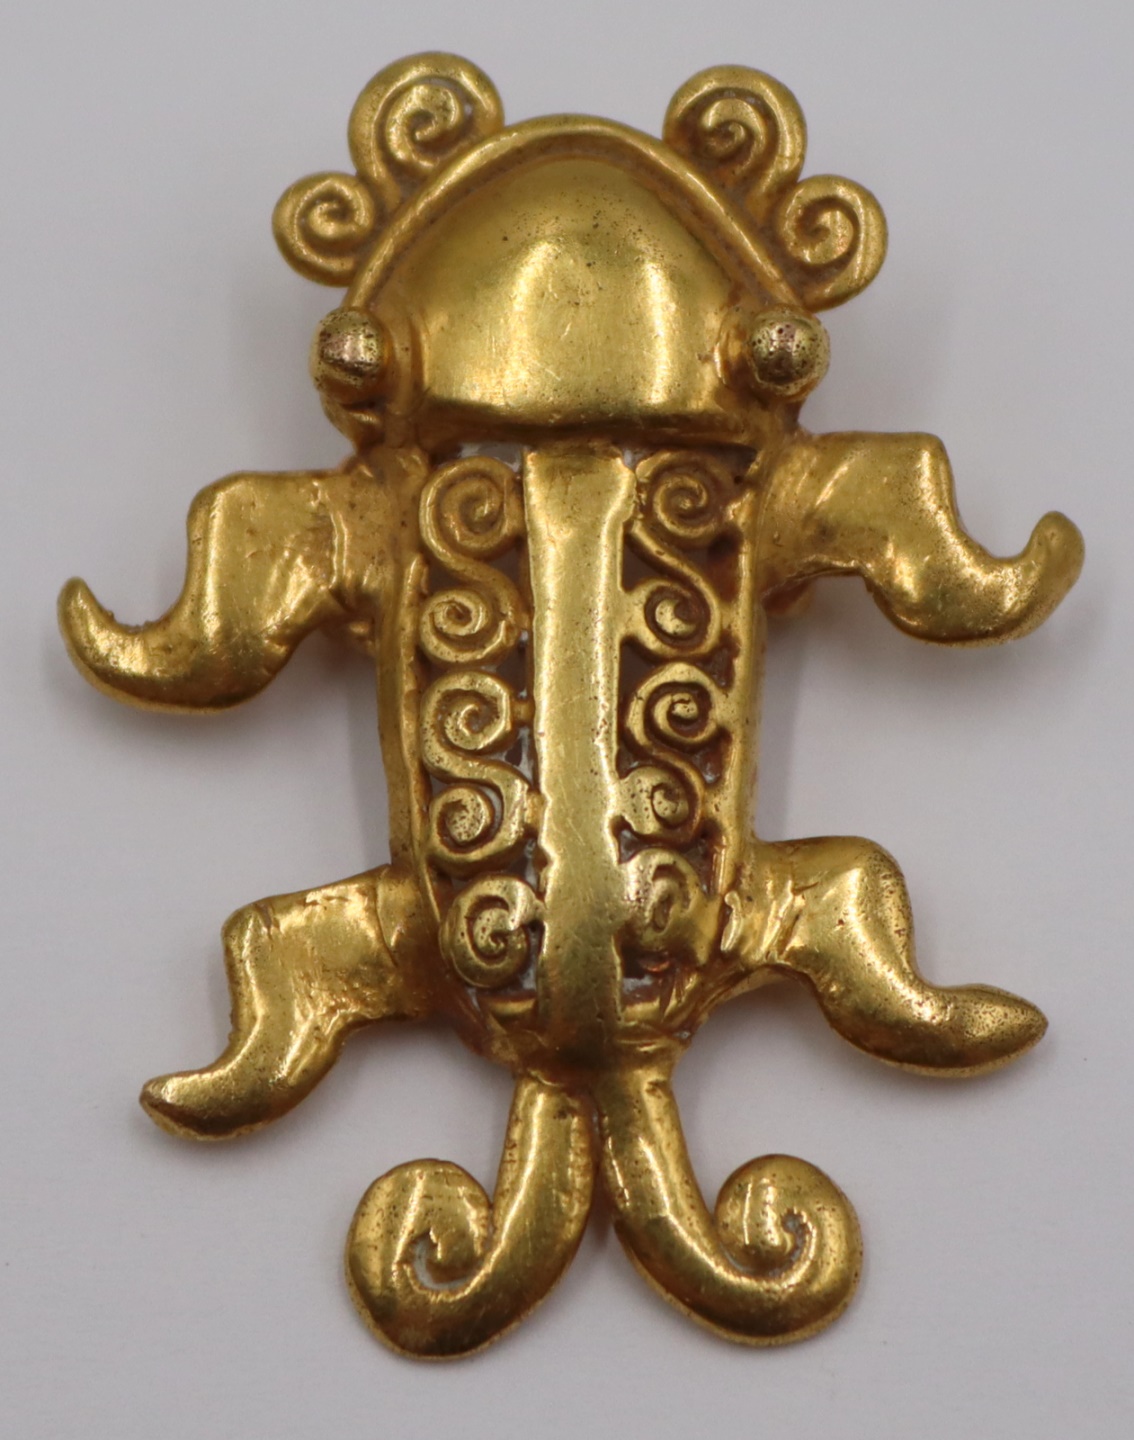 JEWELRY. 18KT+ INCAN GOLD FIGURAL